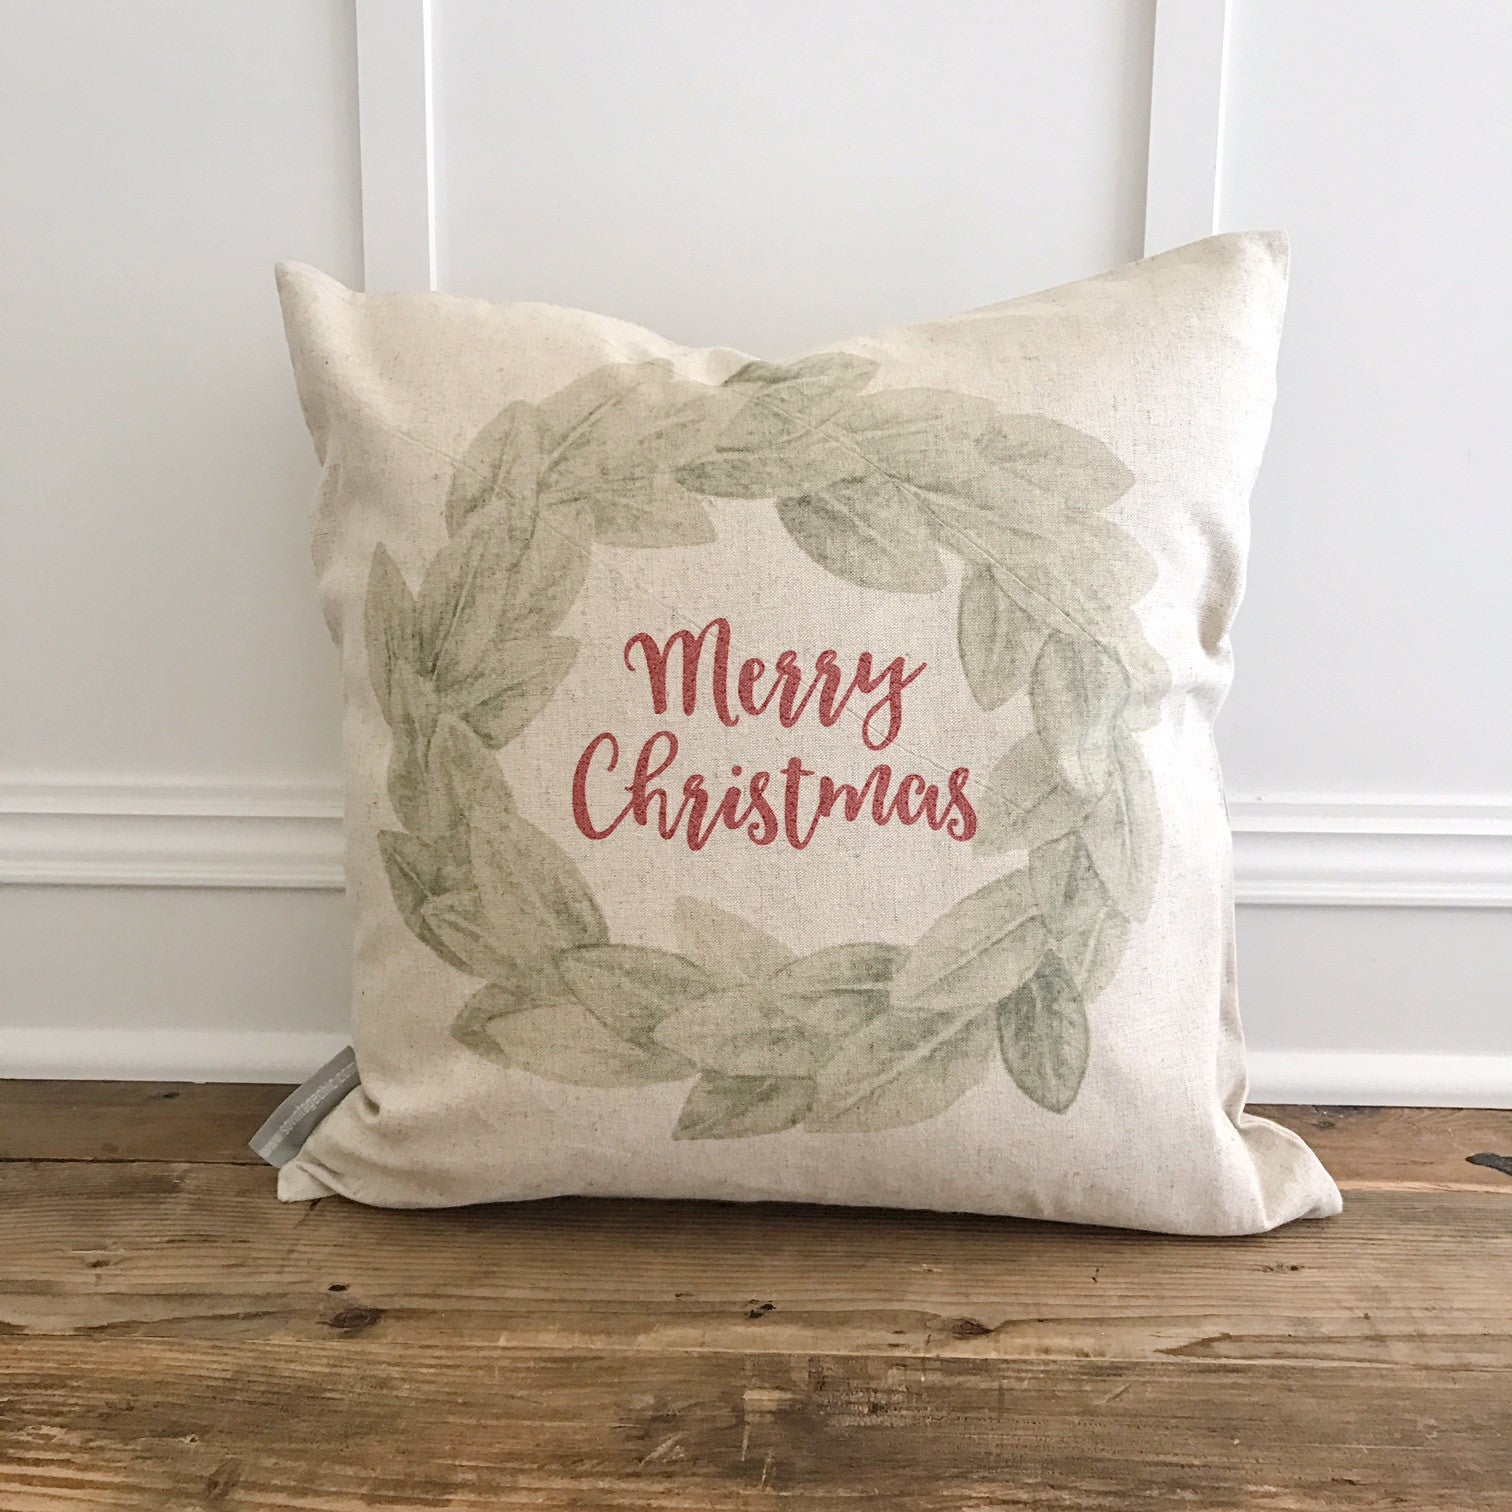 Merry Christmas Magnolia Wreath Pillow Cover - Linen and Ivory